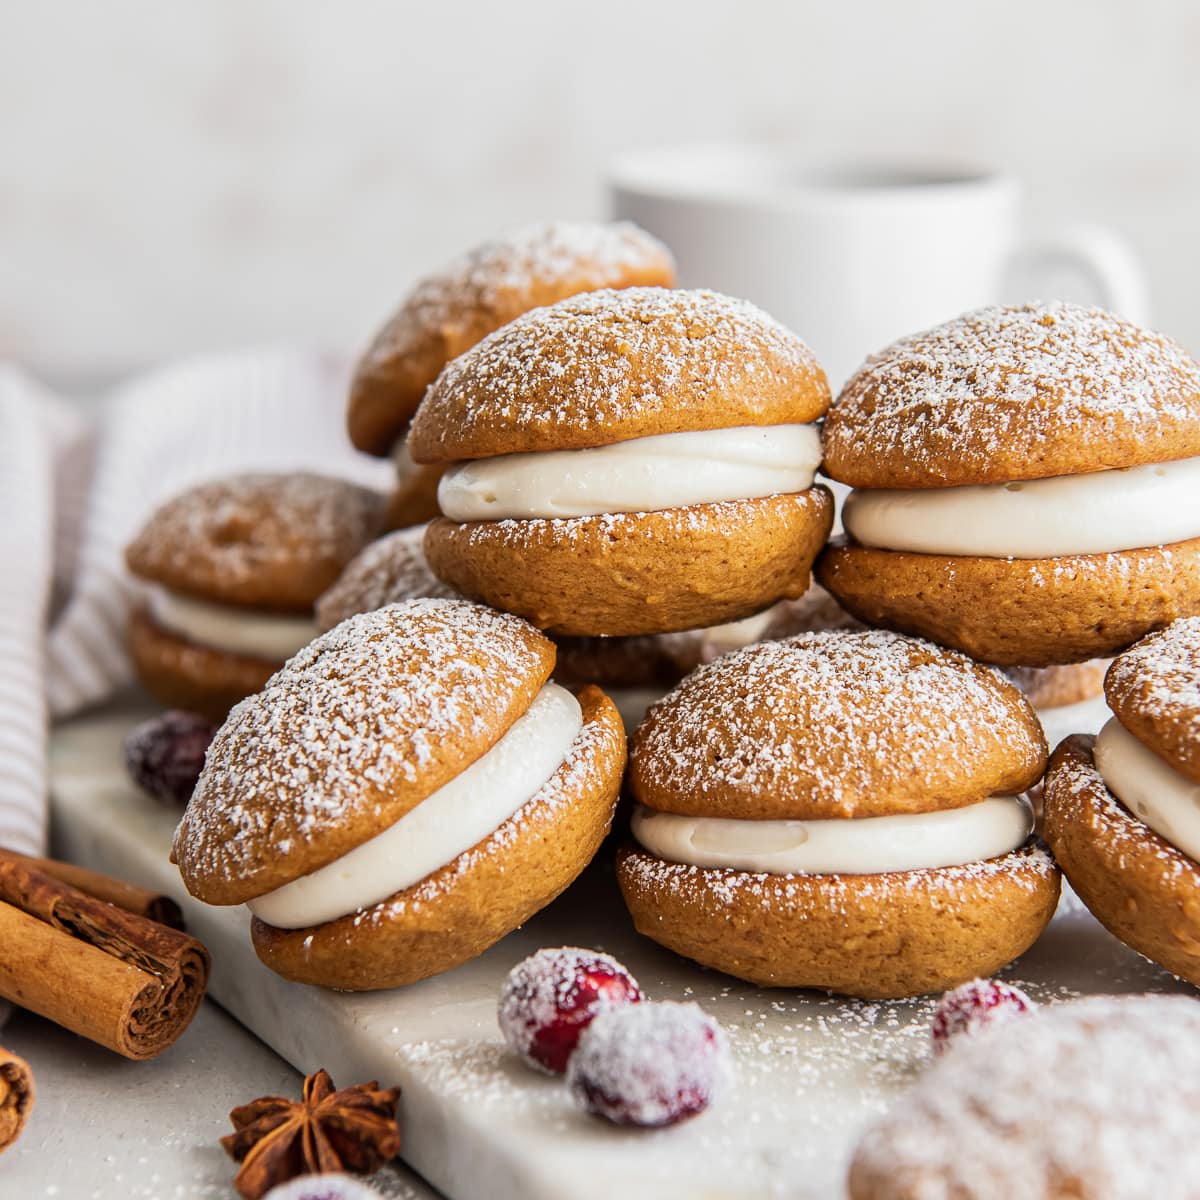 gingerbread whoopie pies in a pile dusted with confectioners' sugar.